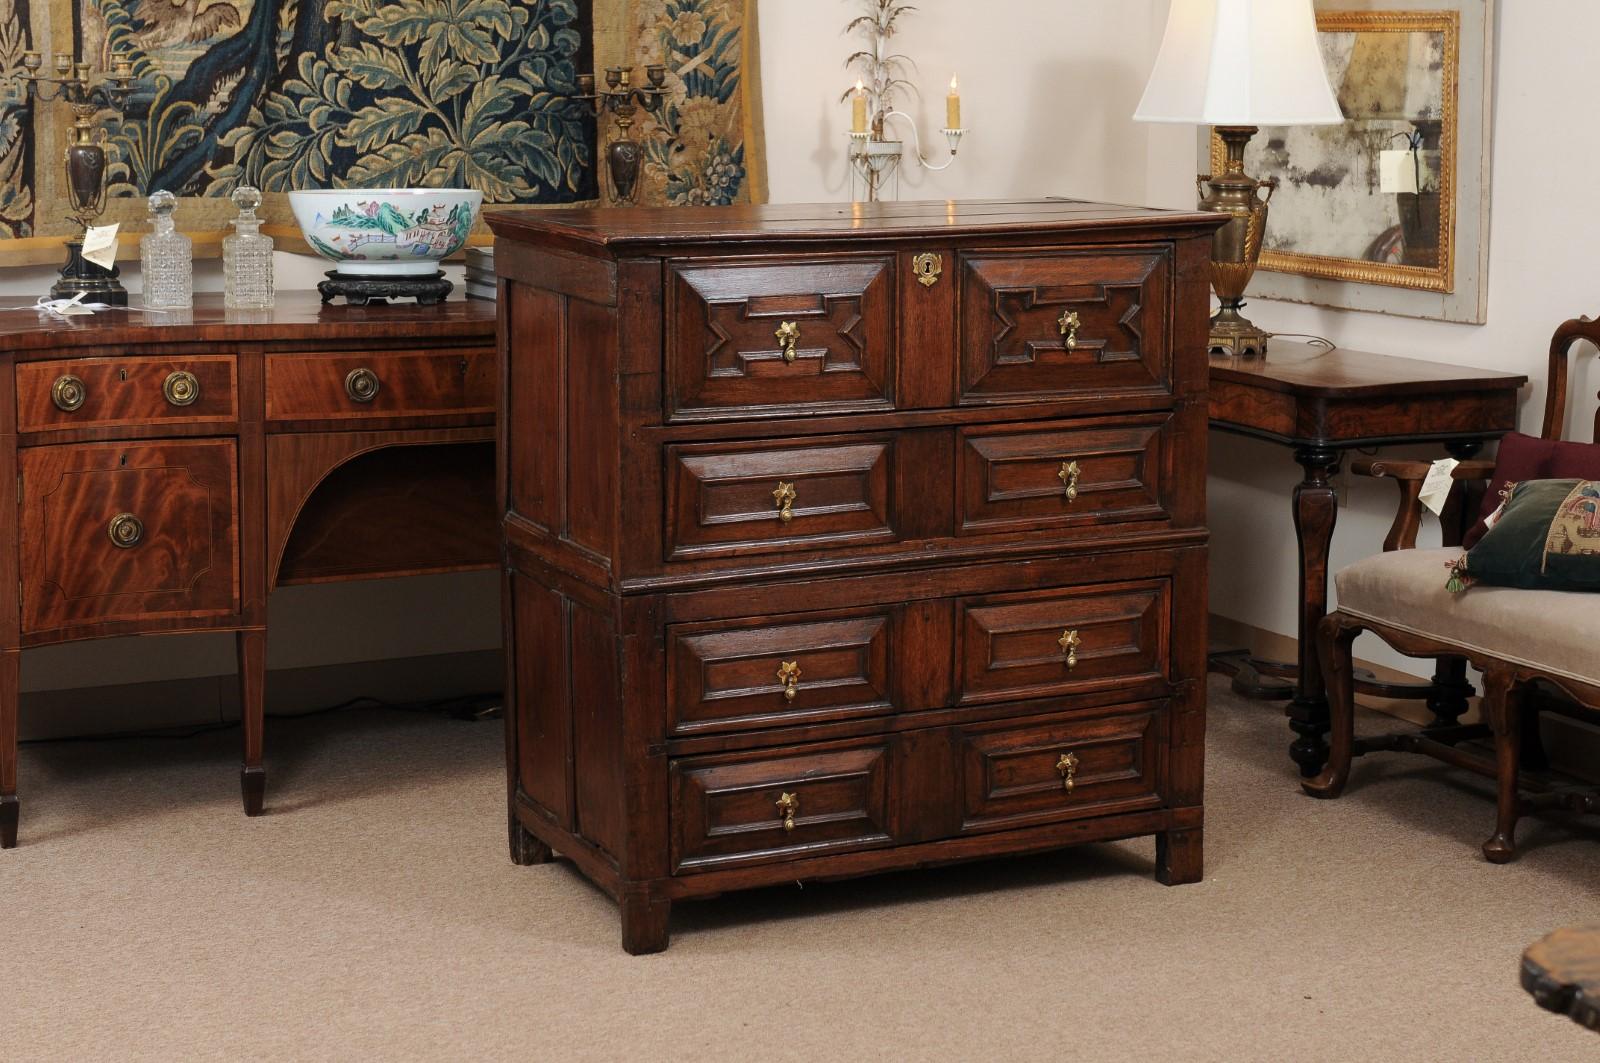 18th Century English Jacobean Style Oak Chest with 4 Drawers In Good Condition For Sale In Atlanta, GA